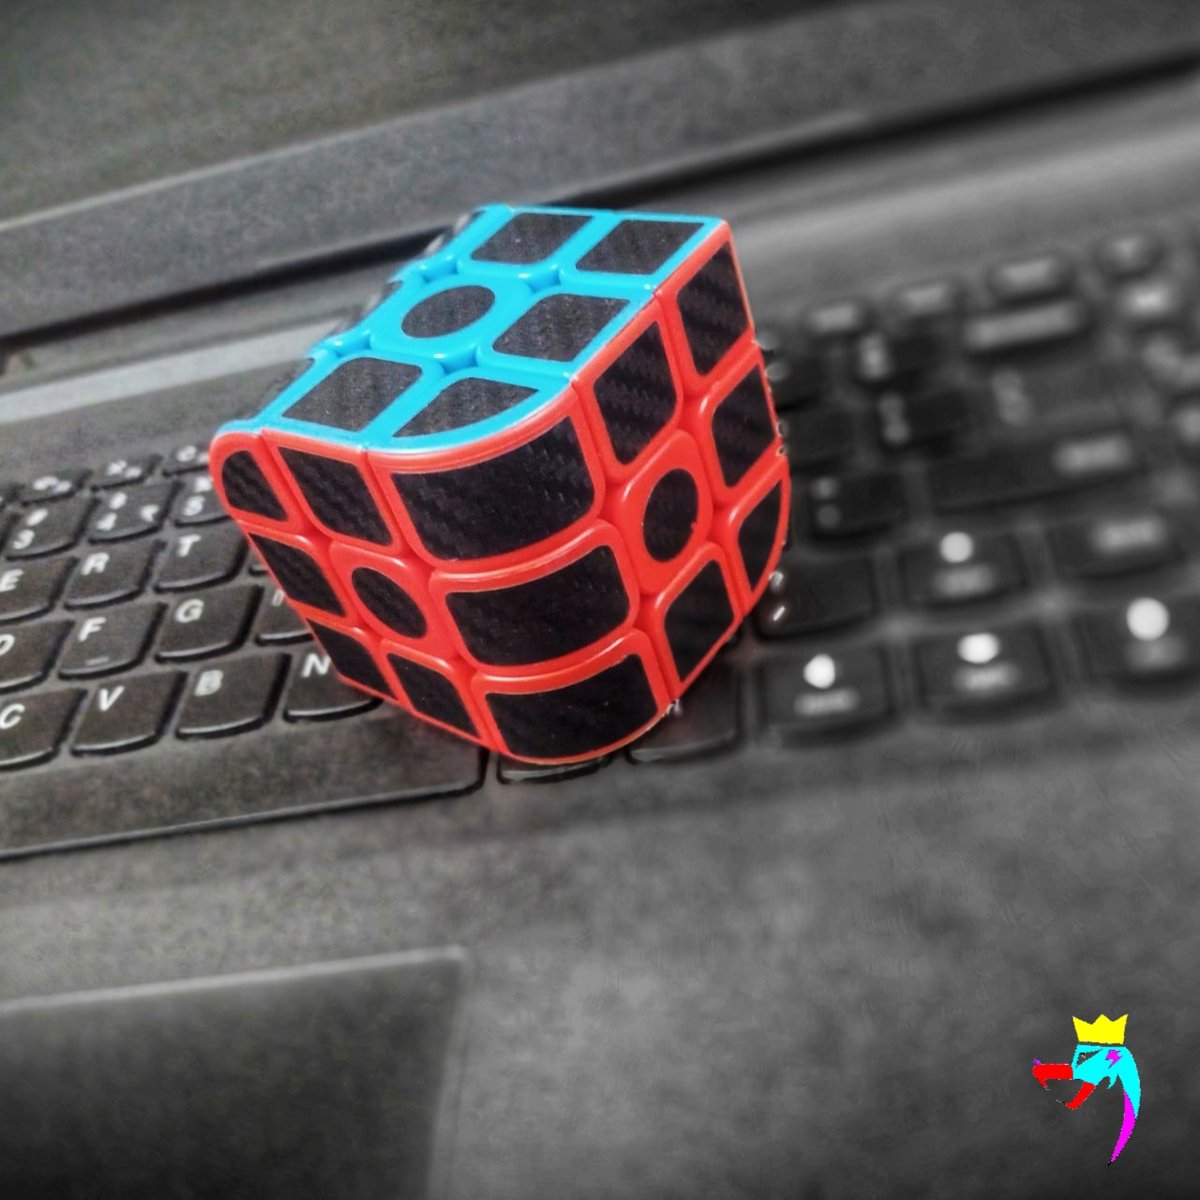 Not, it's not a Rubik's Cube. Only legends know 😌 what it is....